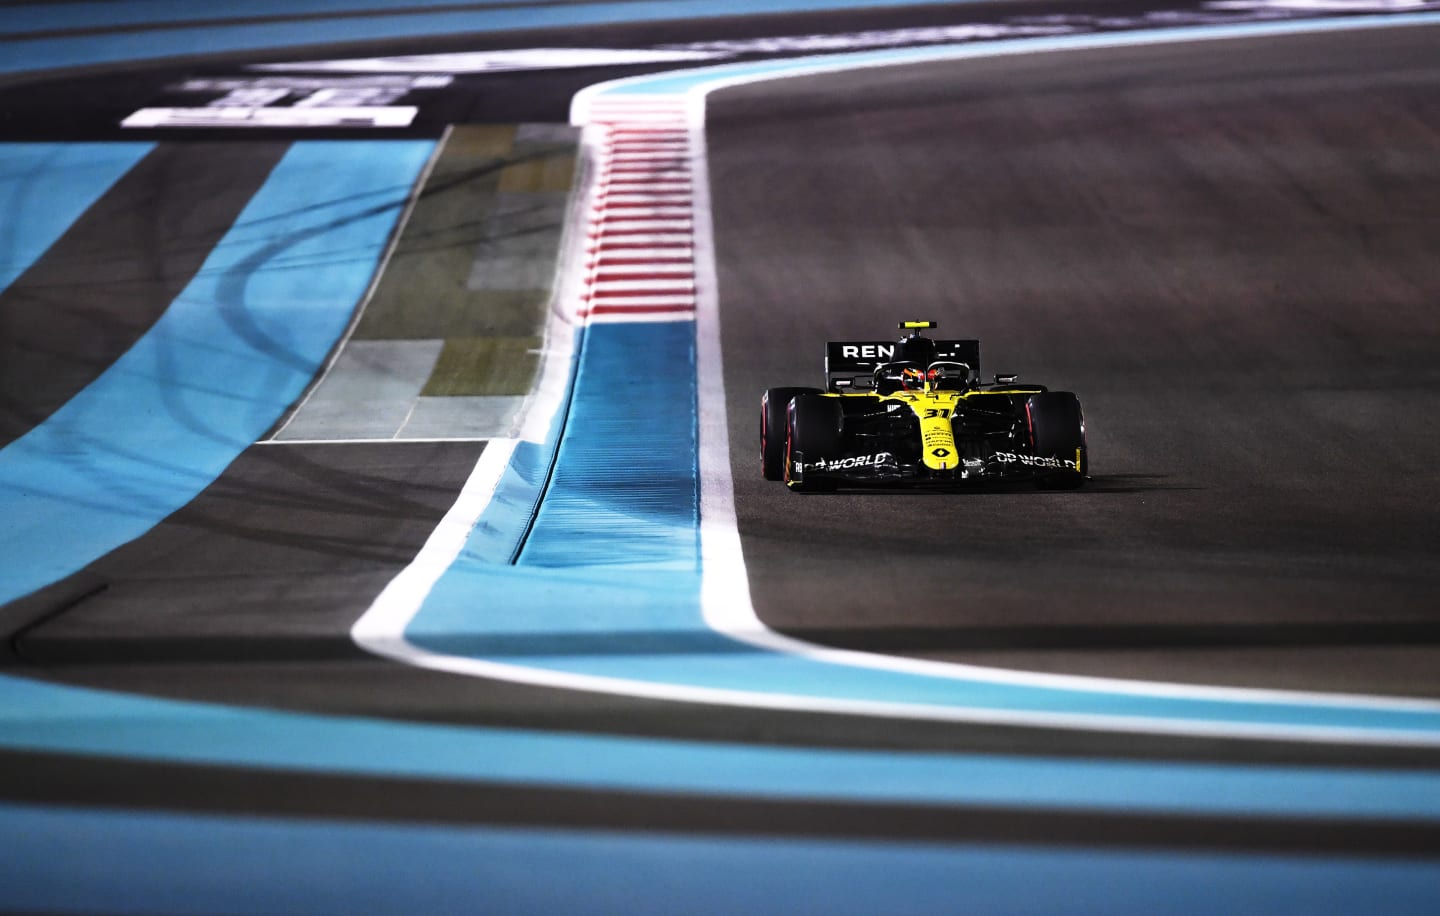 ABU DHABI, UNITED ARAB EMIRATES - DECEMBER 11: Esteban Ocon of France driving the (31) Renault Sport Formula One Team RS20 on track during practice ahead of the F1 Grand Prix of Abu Dhabi at Yas Marina Circuit on December 11, 2020 in Abu Dhabi, United Arab Emirates. (Photo by Rudy Carezzevoli/Getty Images)